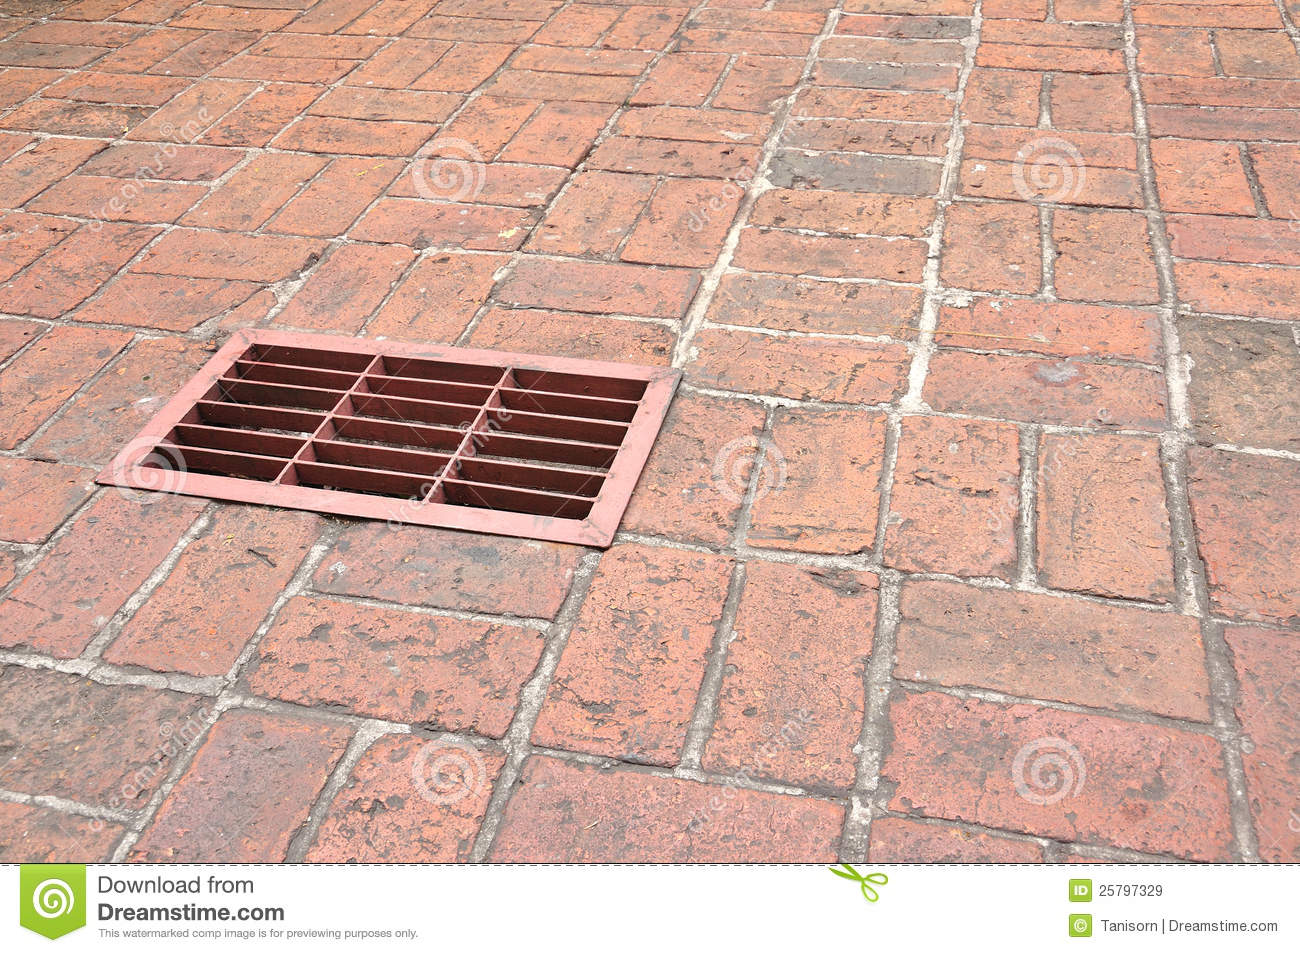 The Manhole Cover On Street Royalty Free Stock Images   Image